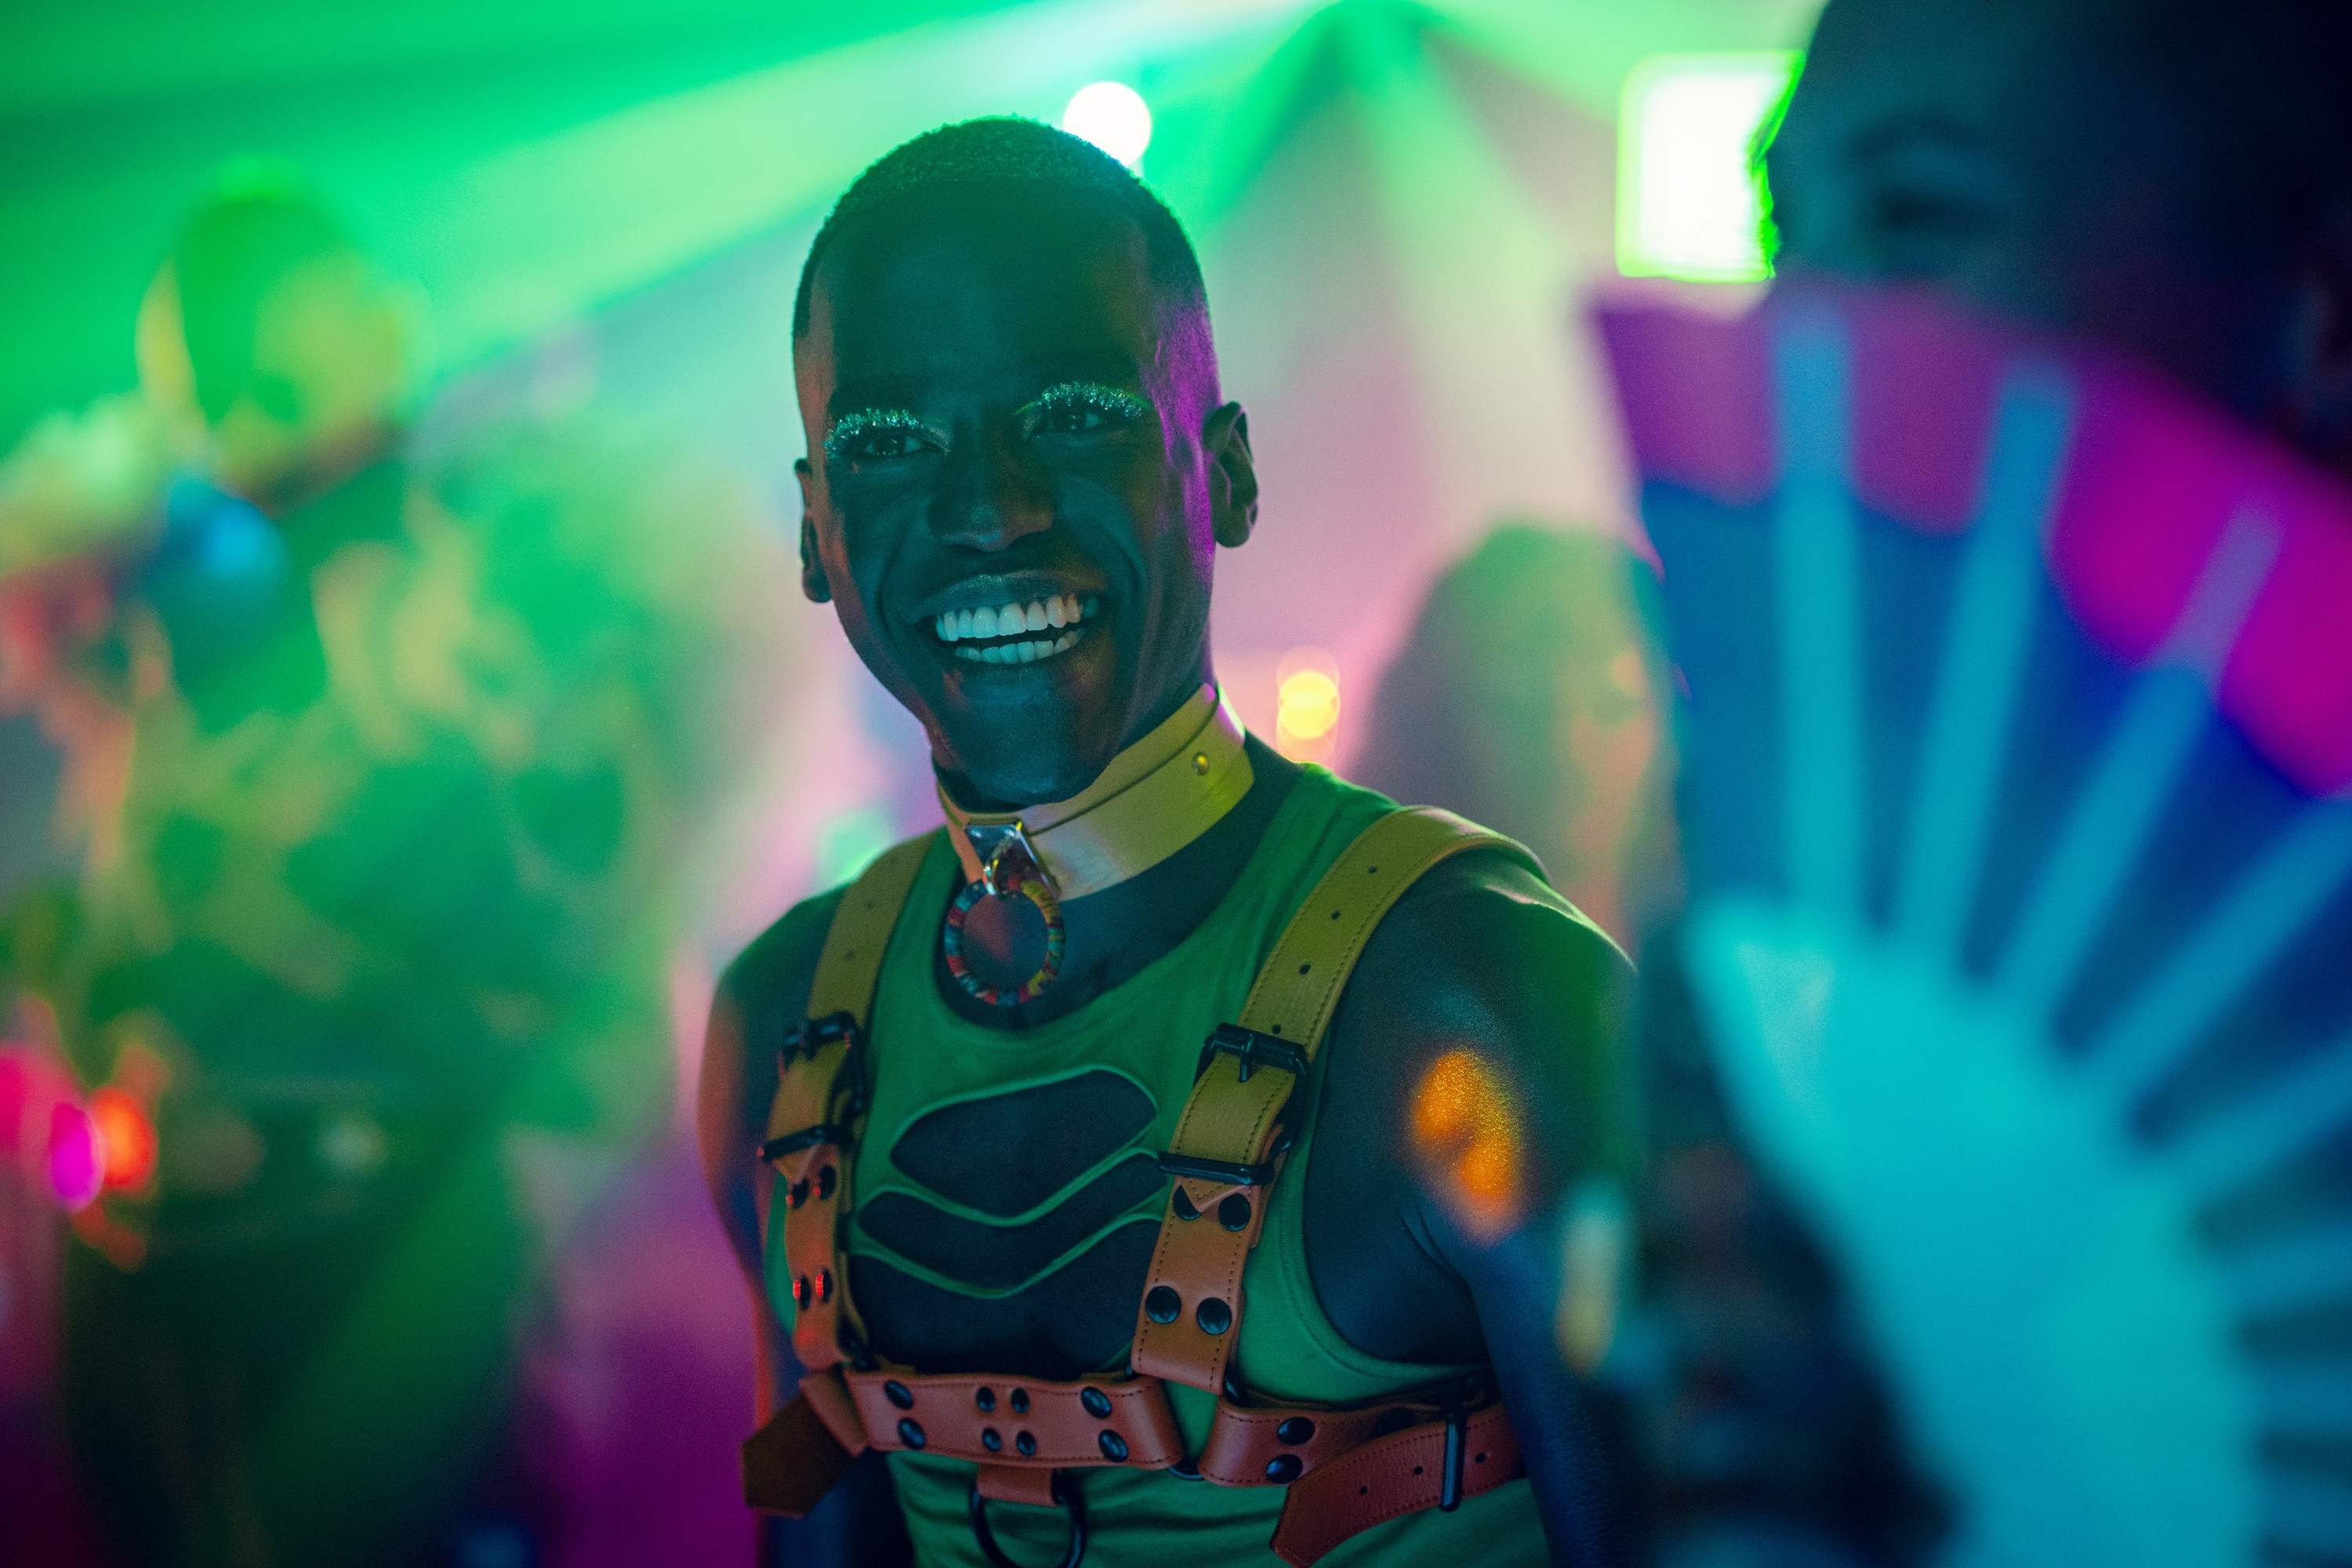 Eric with a beaming smile wearing futuristic attire and bold eye makeup at a club